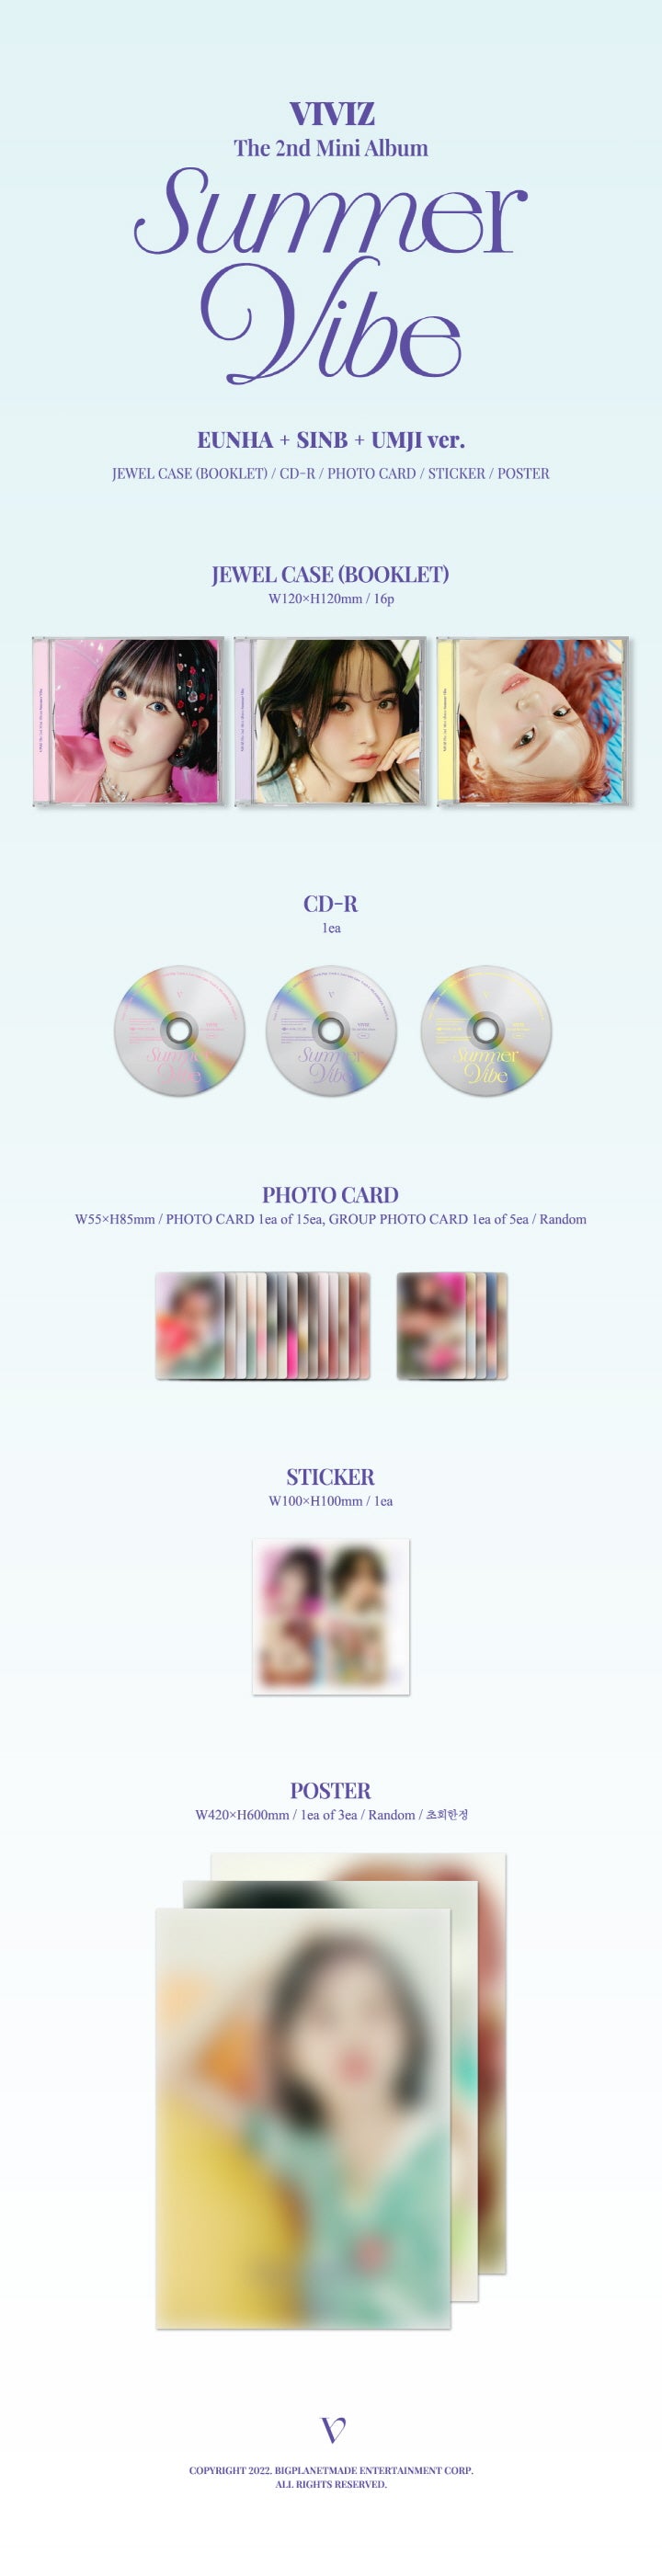 1 CD
1 Booklet (16 pages)
1 Photo Card (random out of 15 types)
1 Group Photo Card (random out of 5 types)
1 Sticker